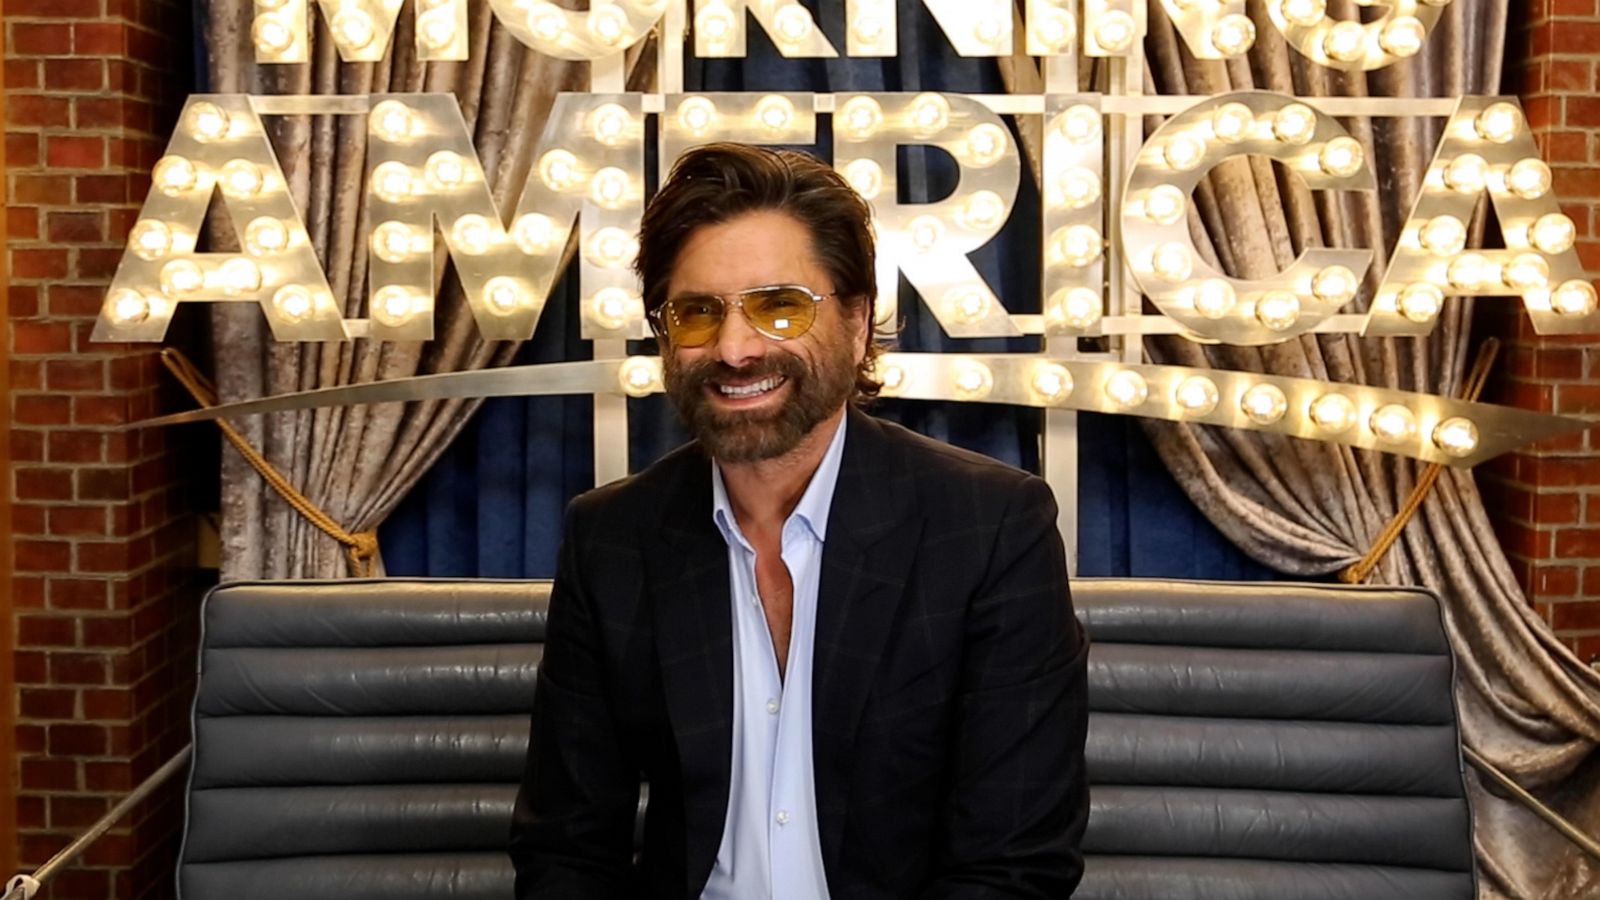 We played Ask Me Anything with John Stamos backstage at 'GMA